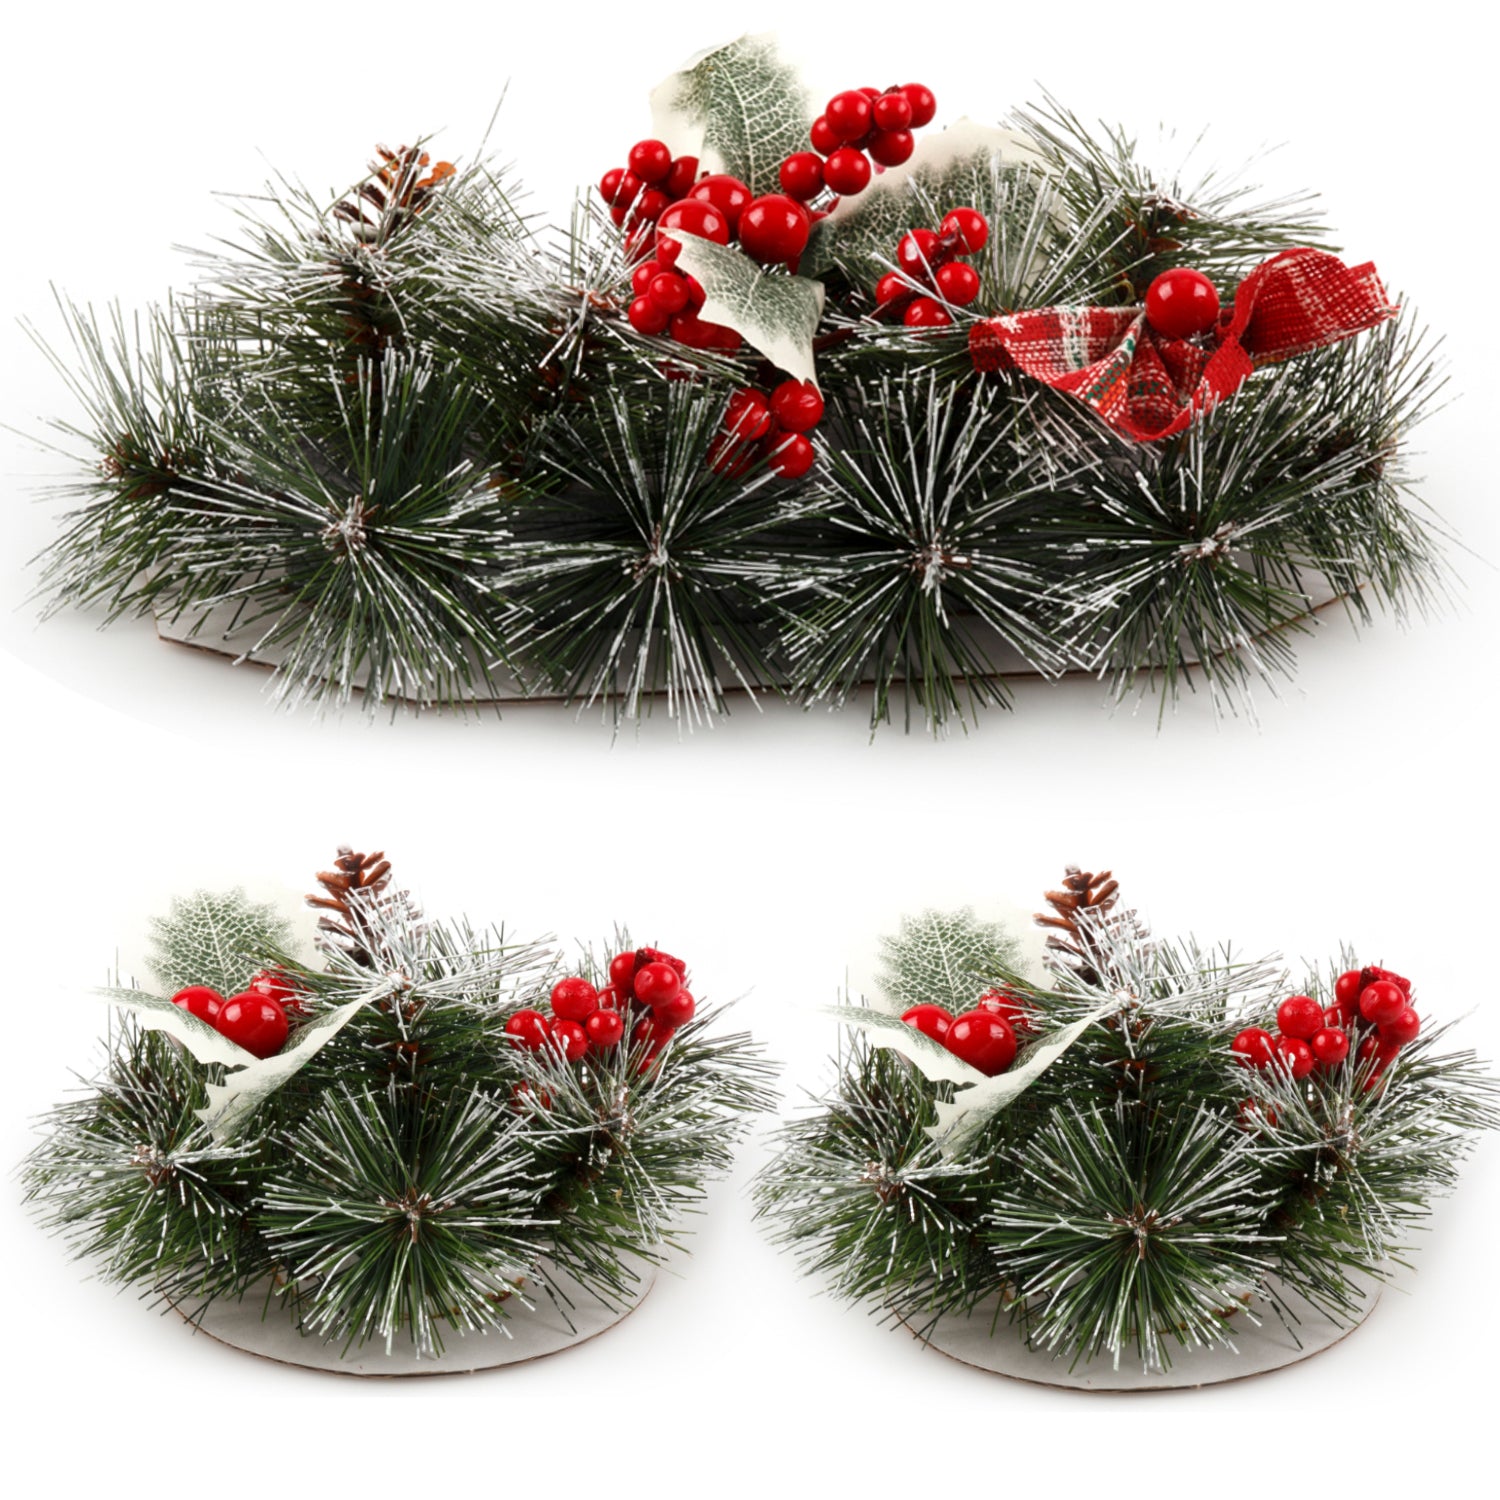 Christmas Floral Table Arrangements Red Berries Pine Cones Flowers Decorations, Large - SILBERSHELL